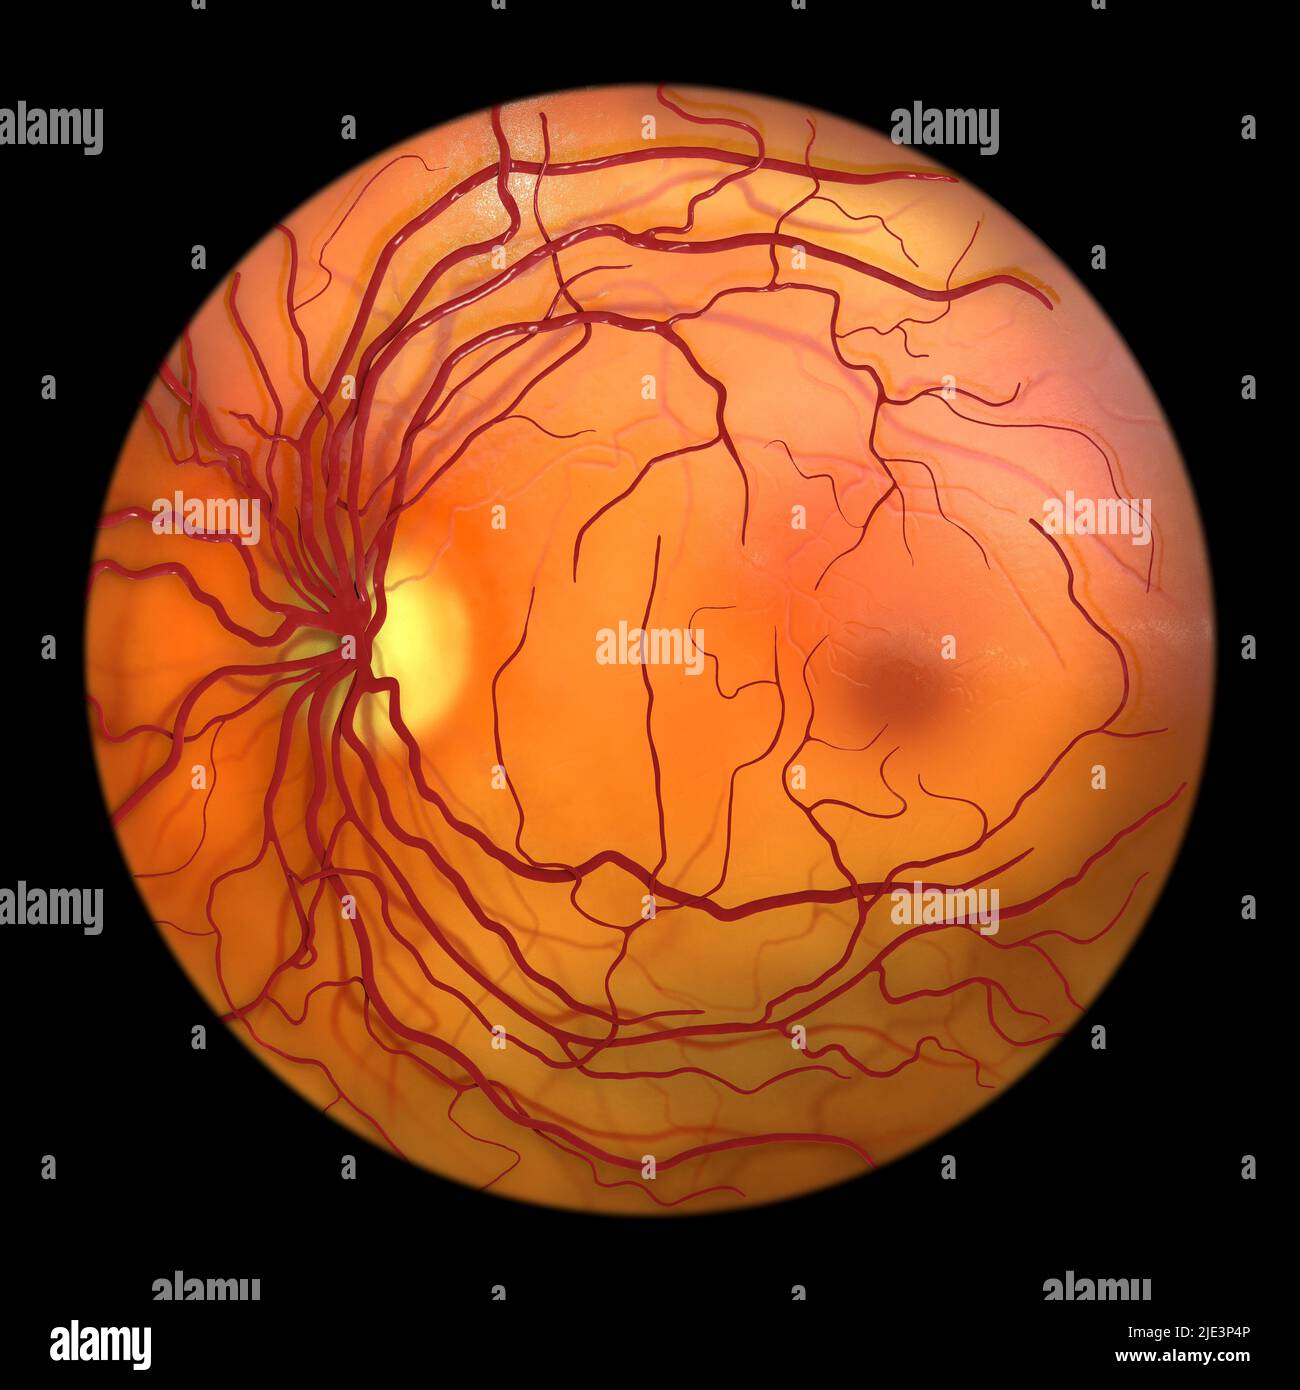 Normal retina, ophthalmoscope image, illustration. The retina is the light-sensitive membrane that lines the back of the eye. Blood vessels (red) radi Stock Photo